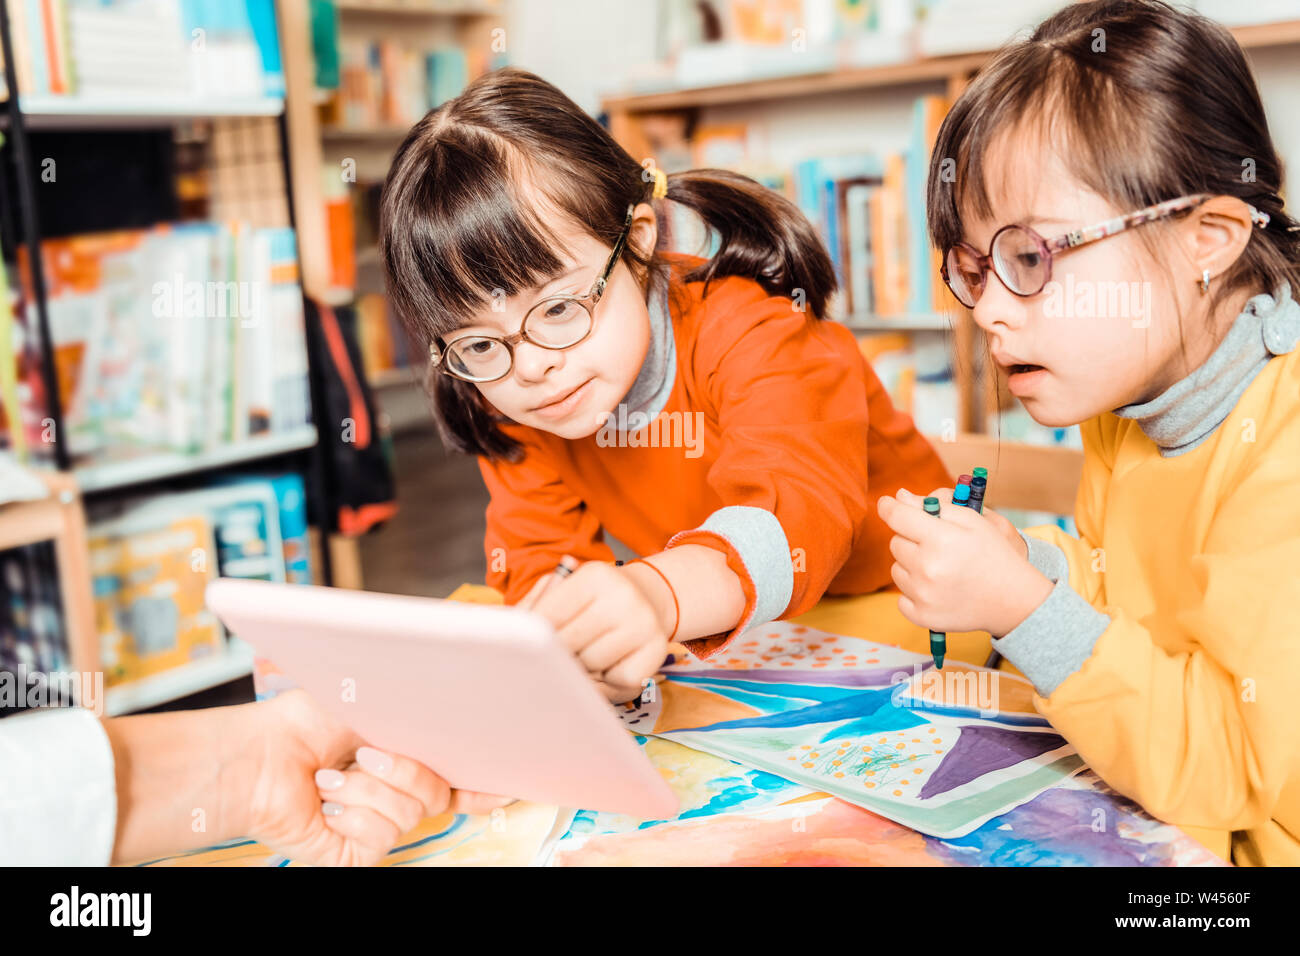 Curious sisters with down syndrome being focused on a tablet Stock Photo